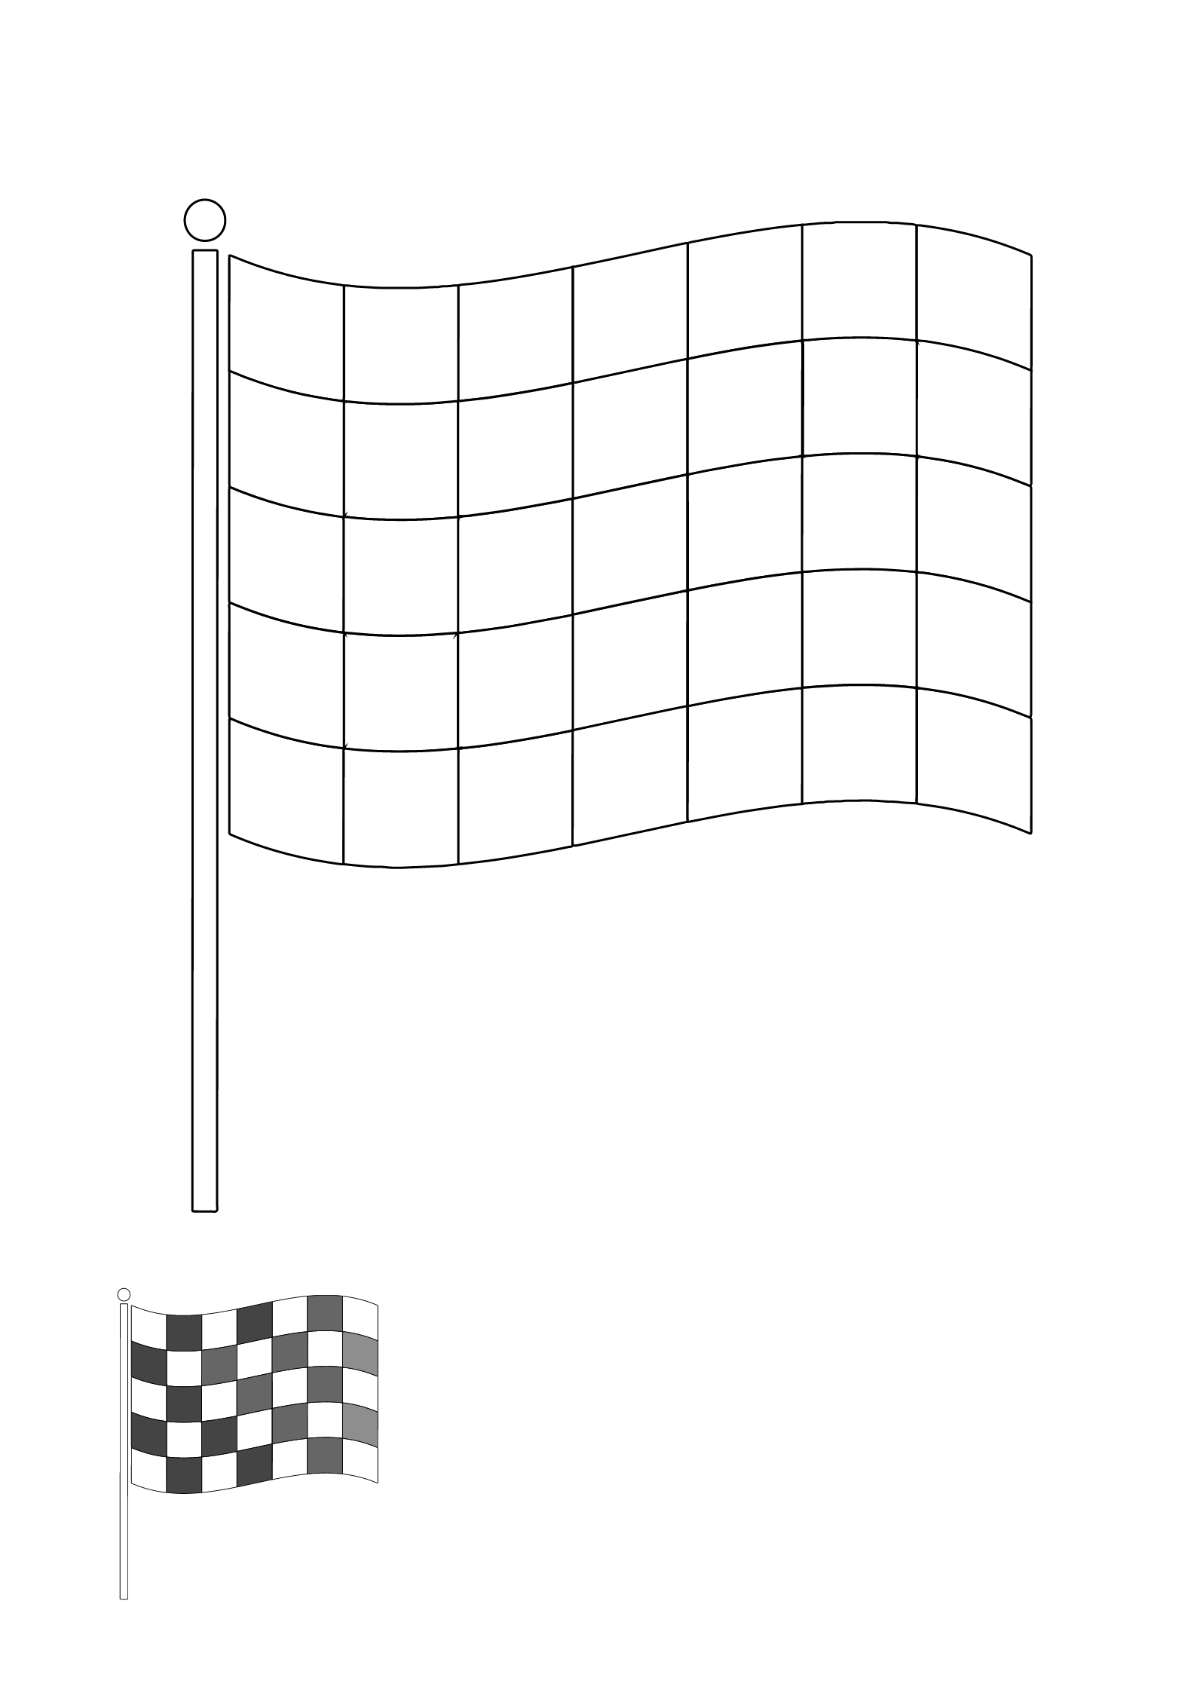 Faded Checkered Flag coloring page